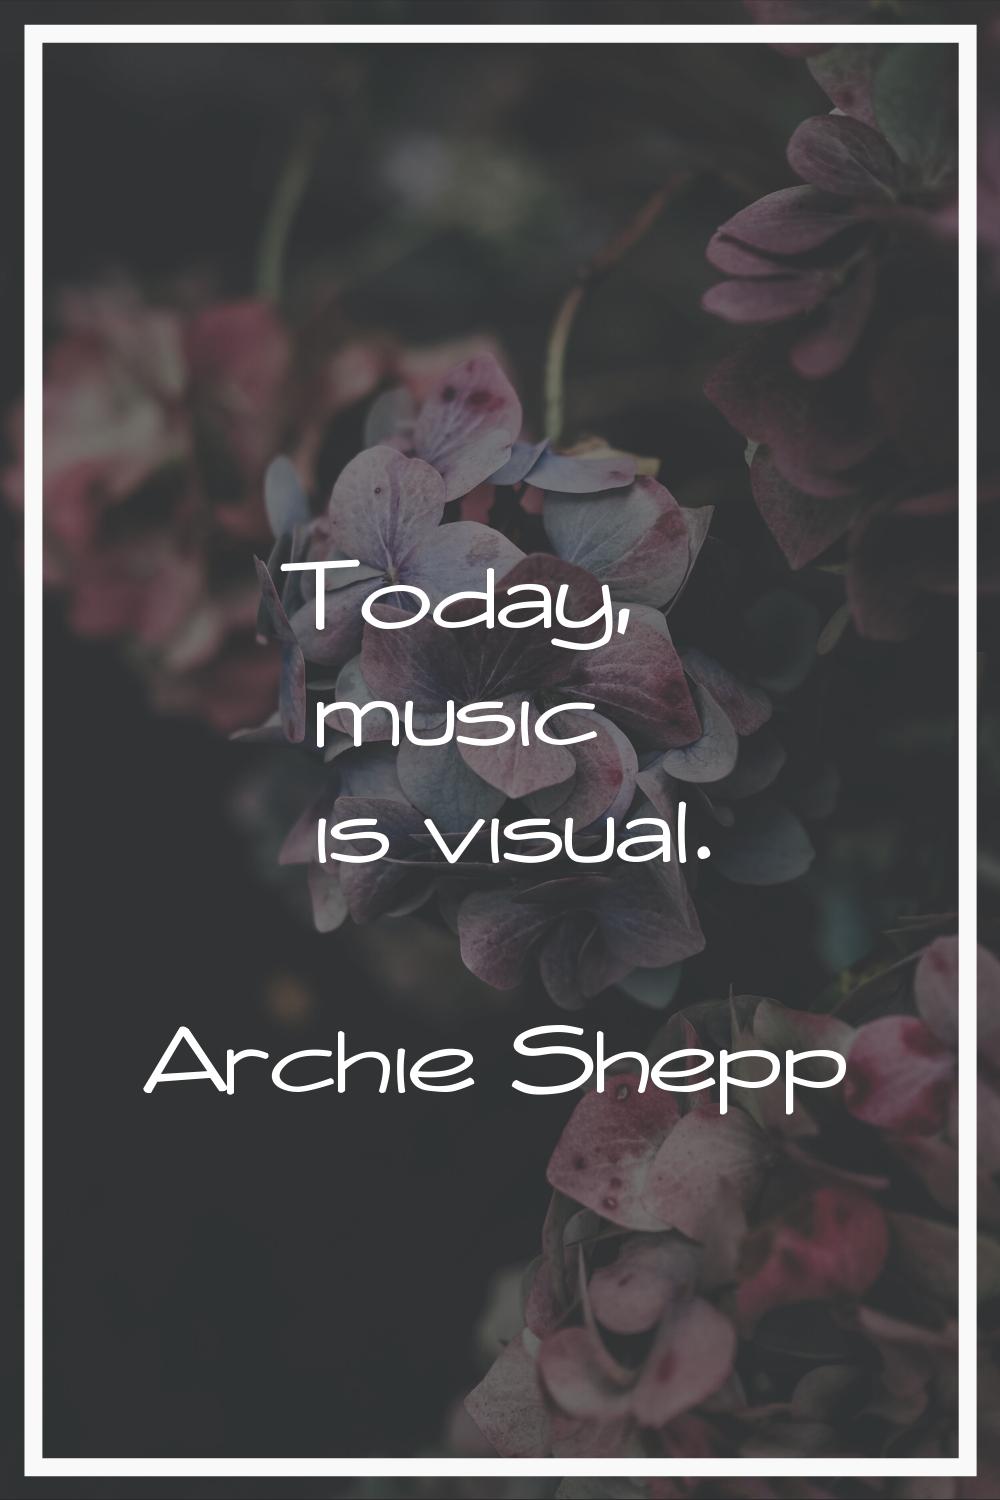 Today, music is visual.